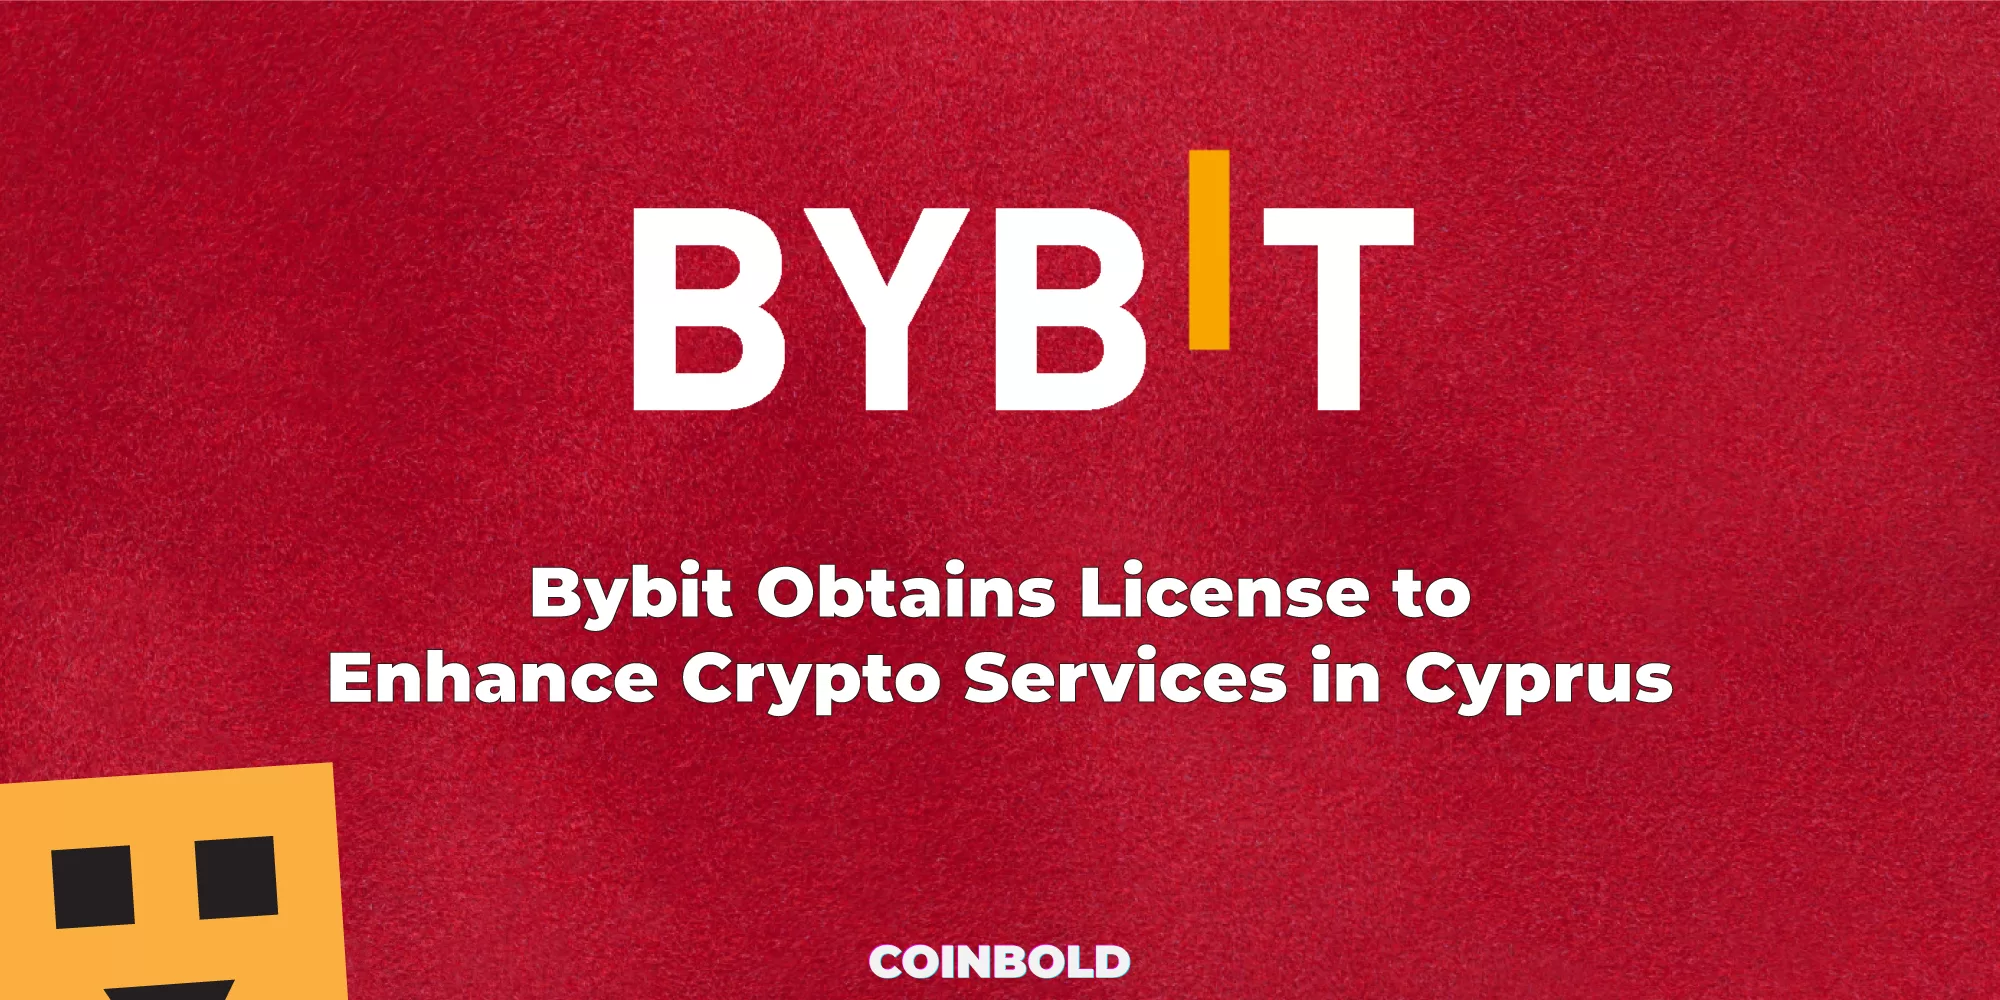 Bybit Obtains License to Enhance Crypto Services in Cyprus